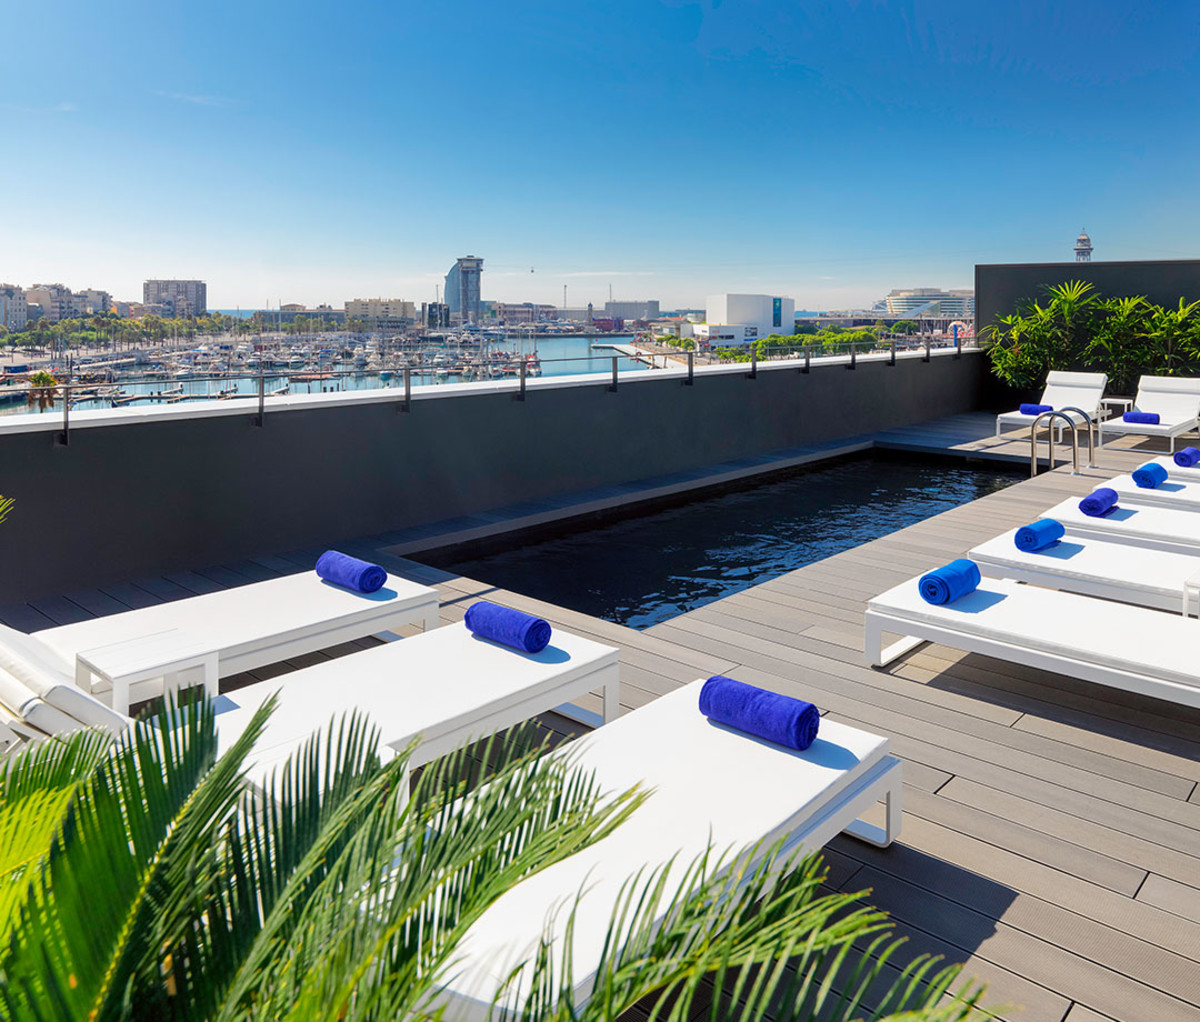 The pool at H10 Port Vell